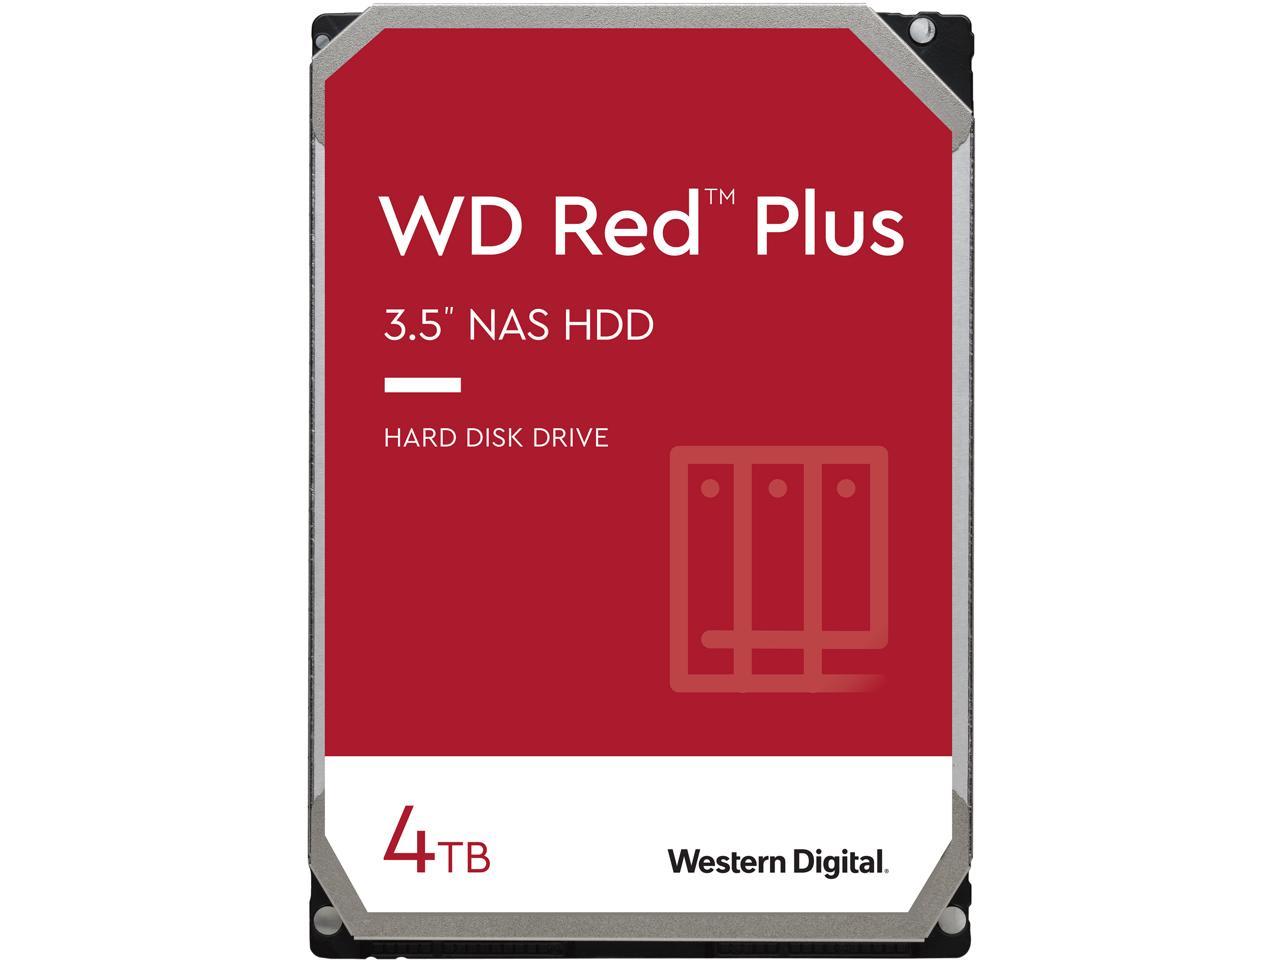 Newegg - WD Red Plus 4TB - $69.99 with code